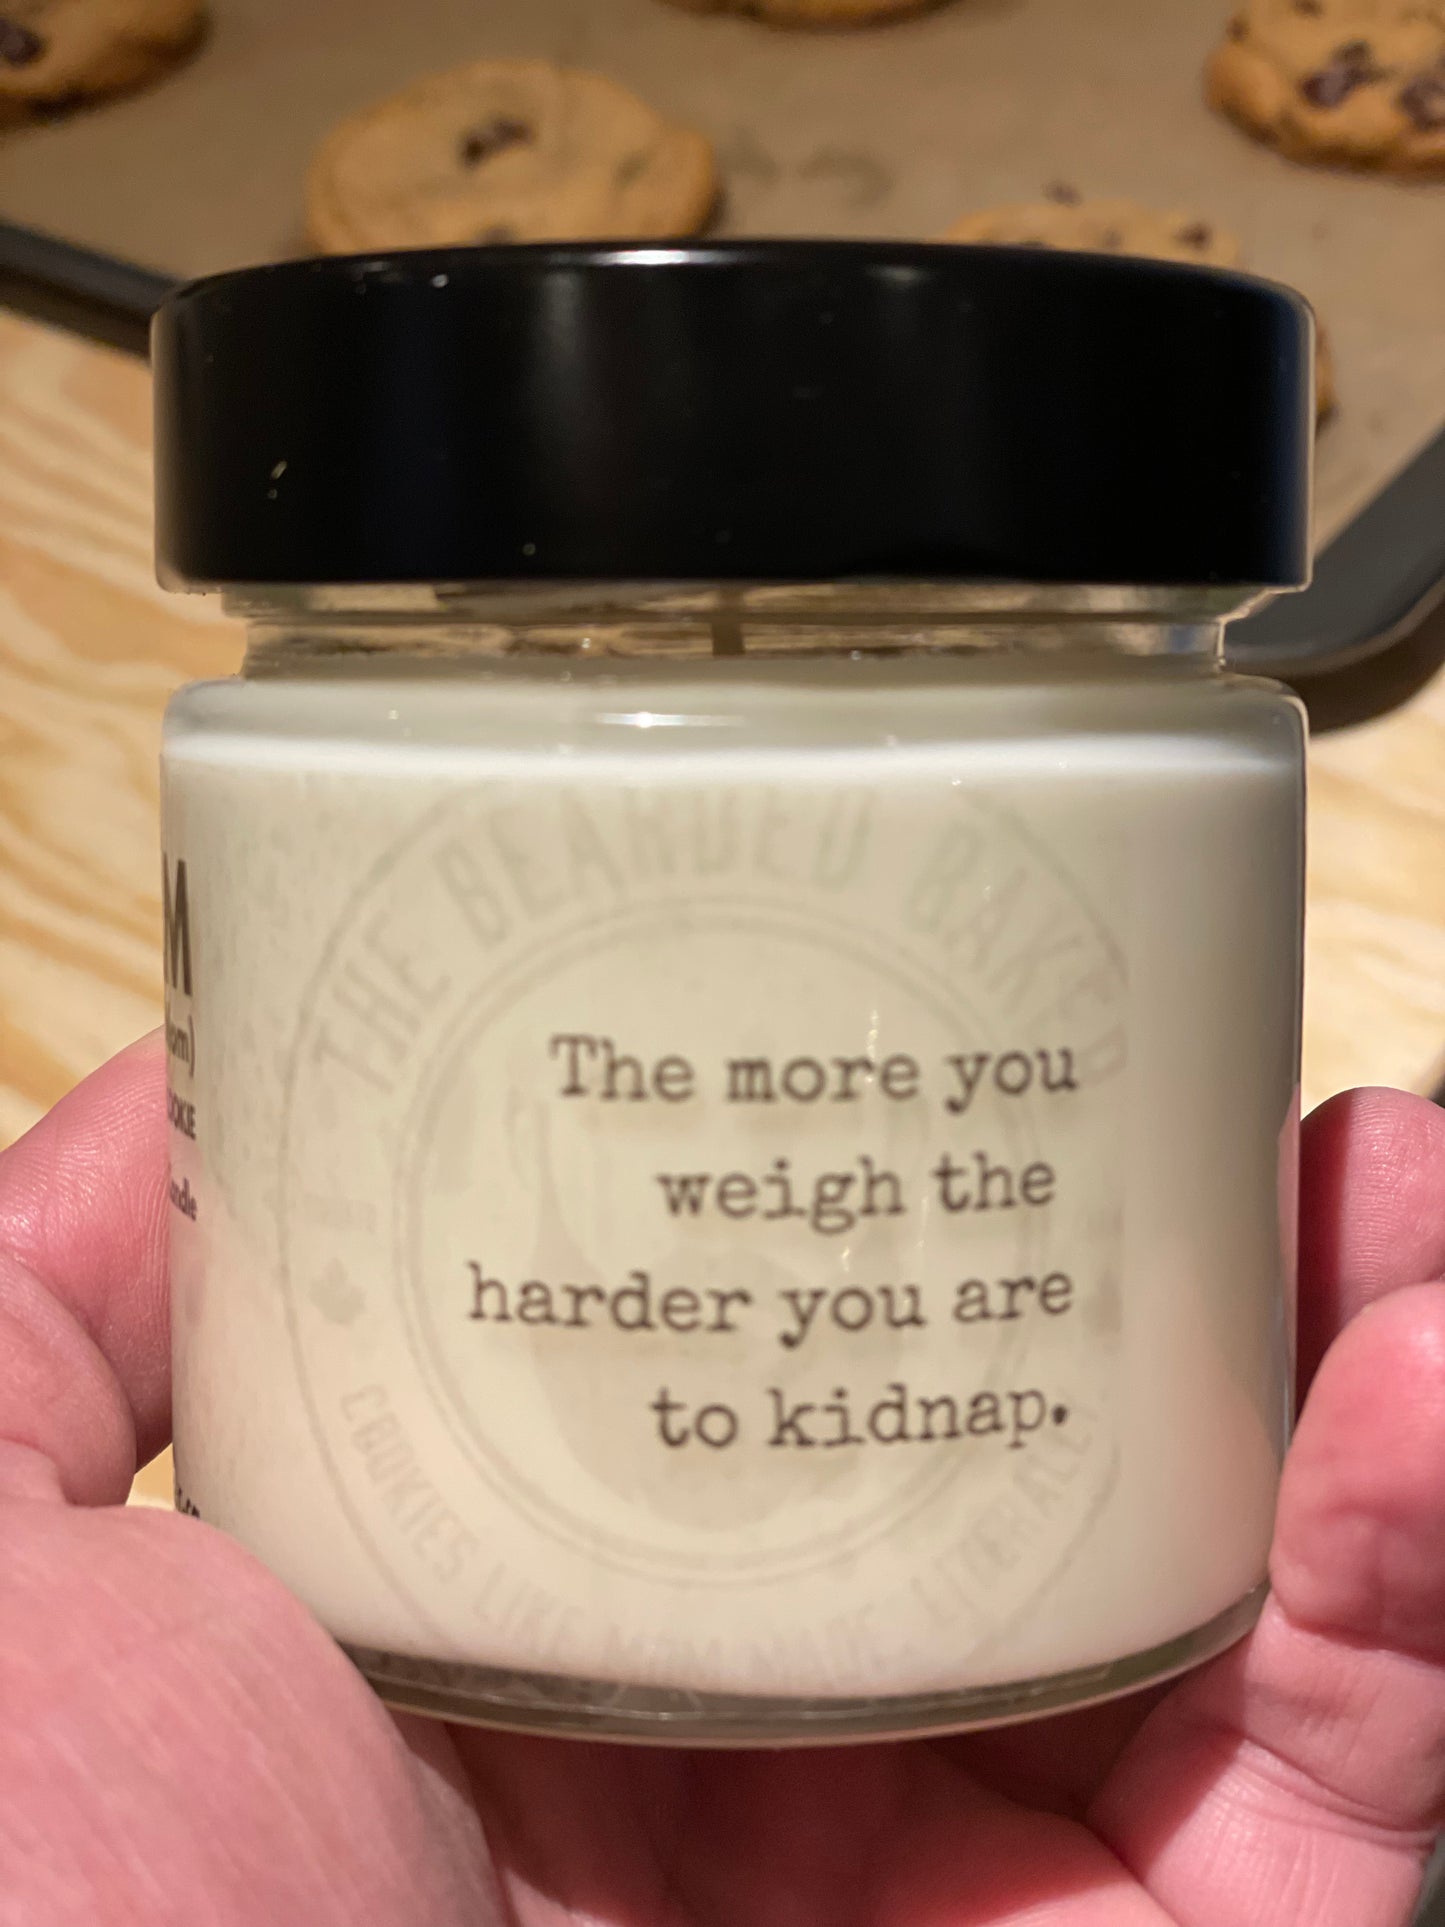 Cookie Scented Candle